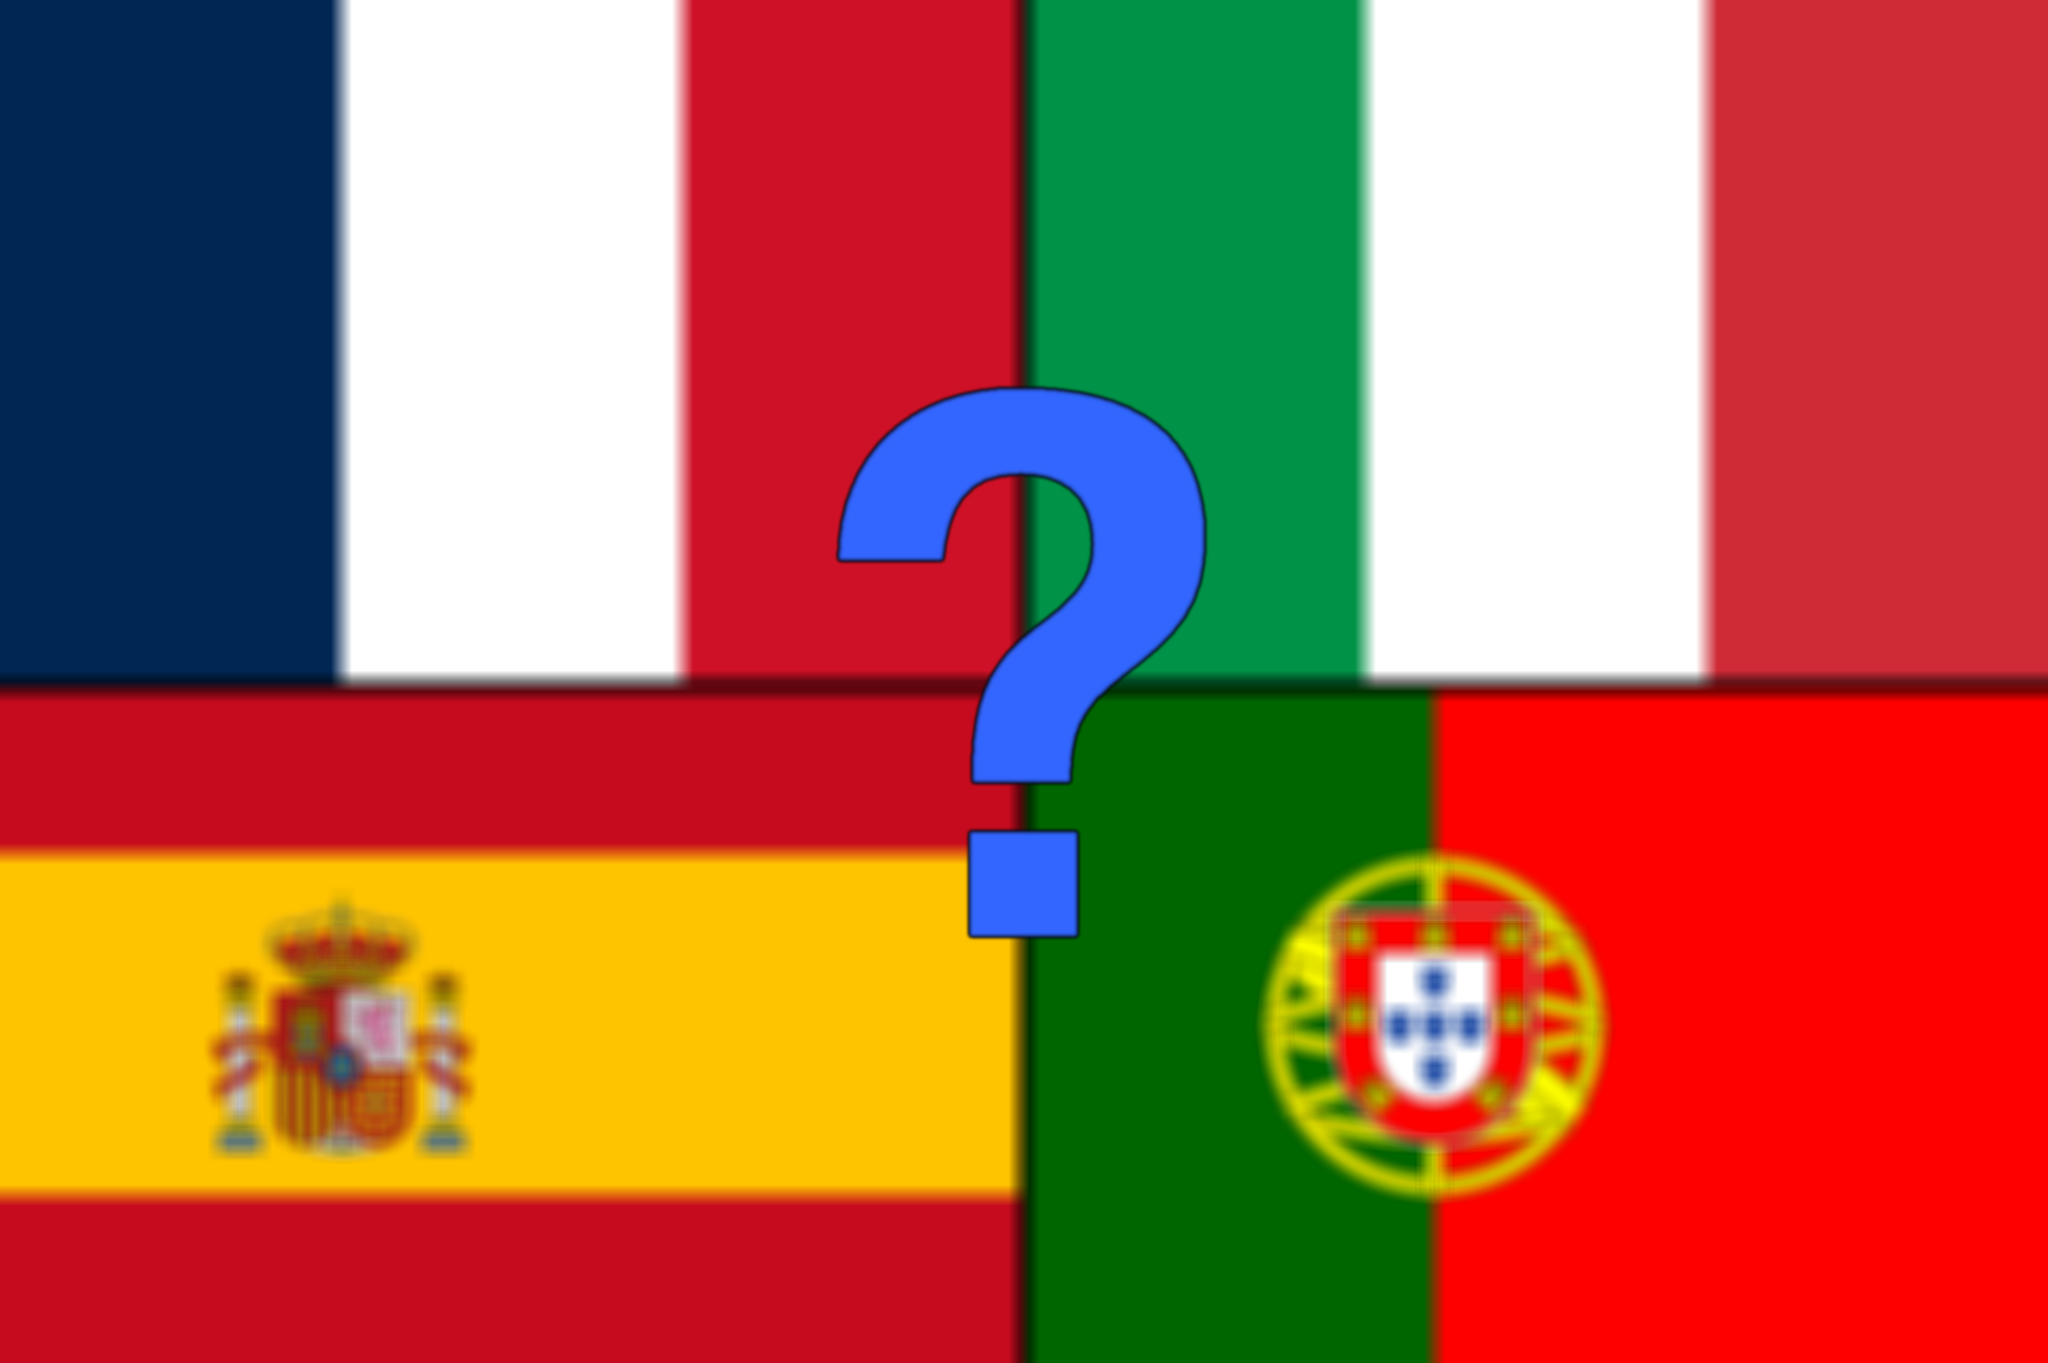 Guess the language : French, Italian, Spanish, or Portuguese?